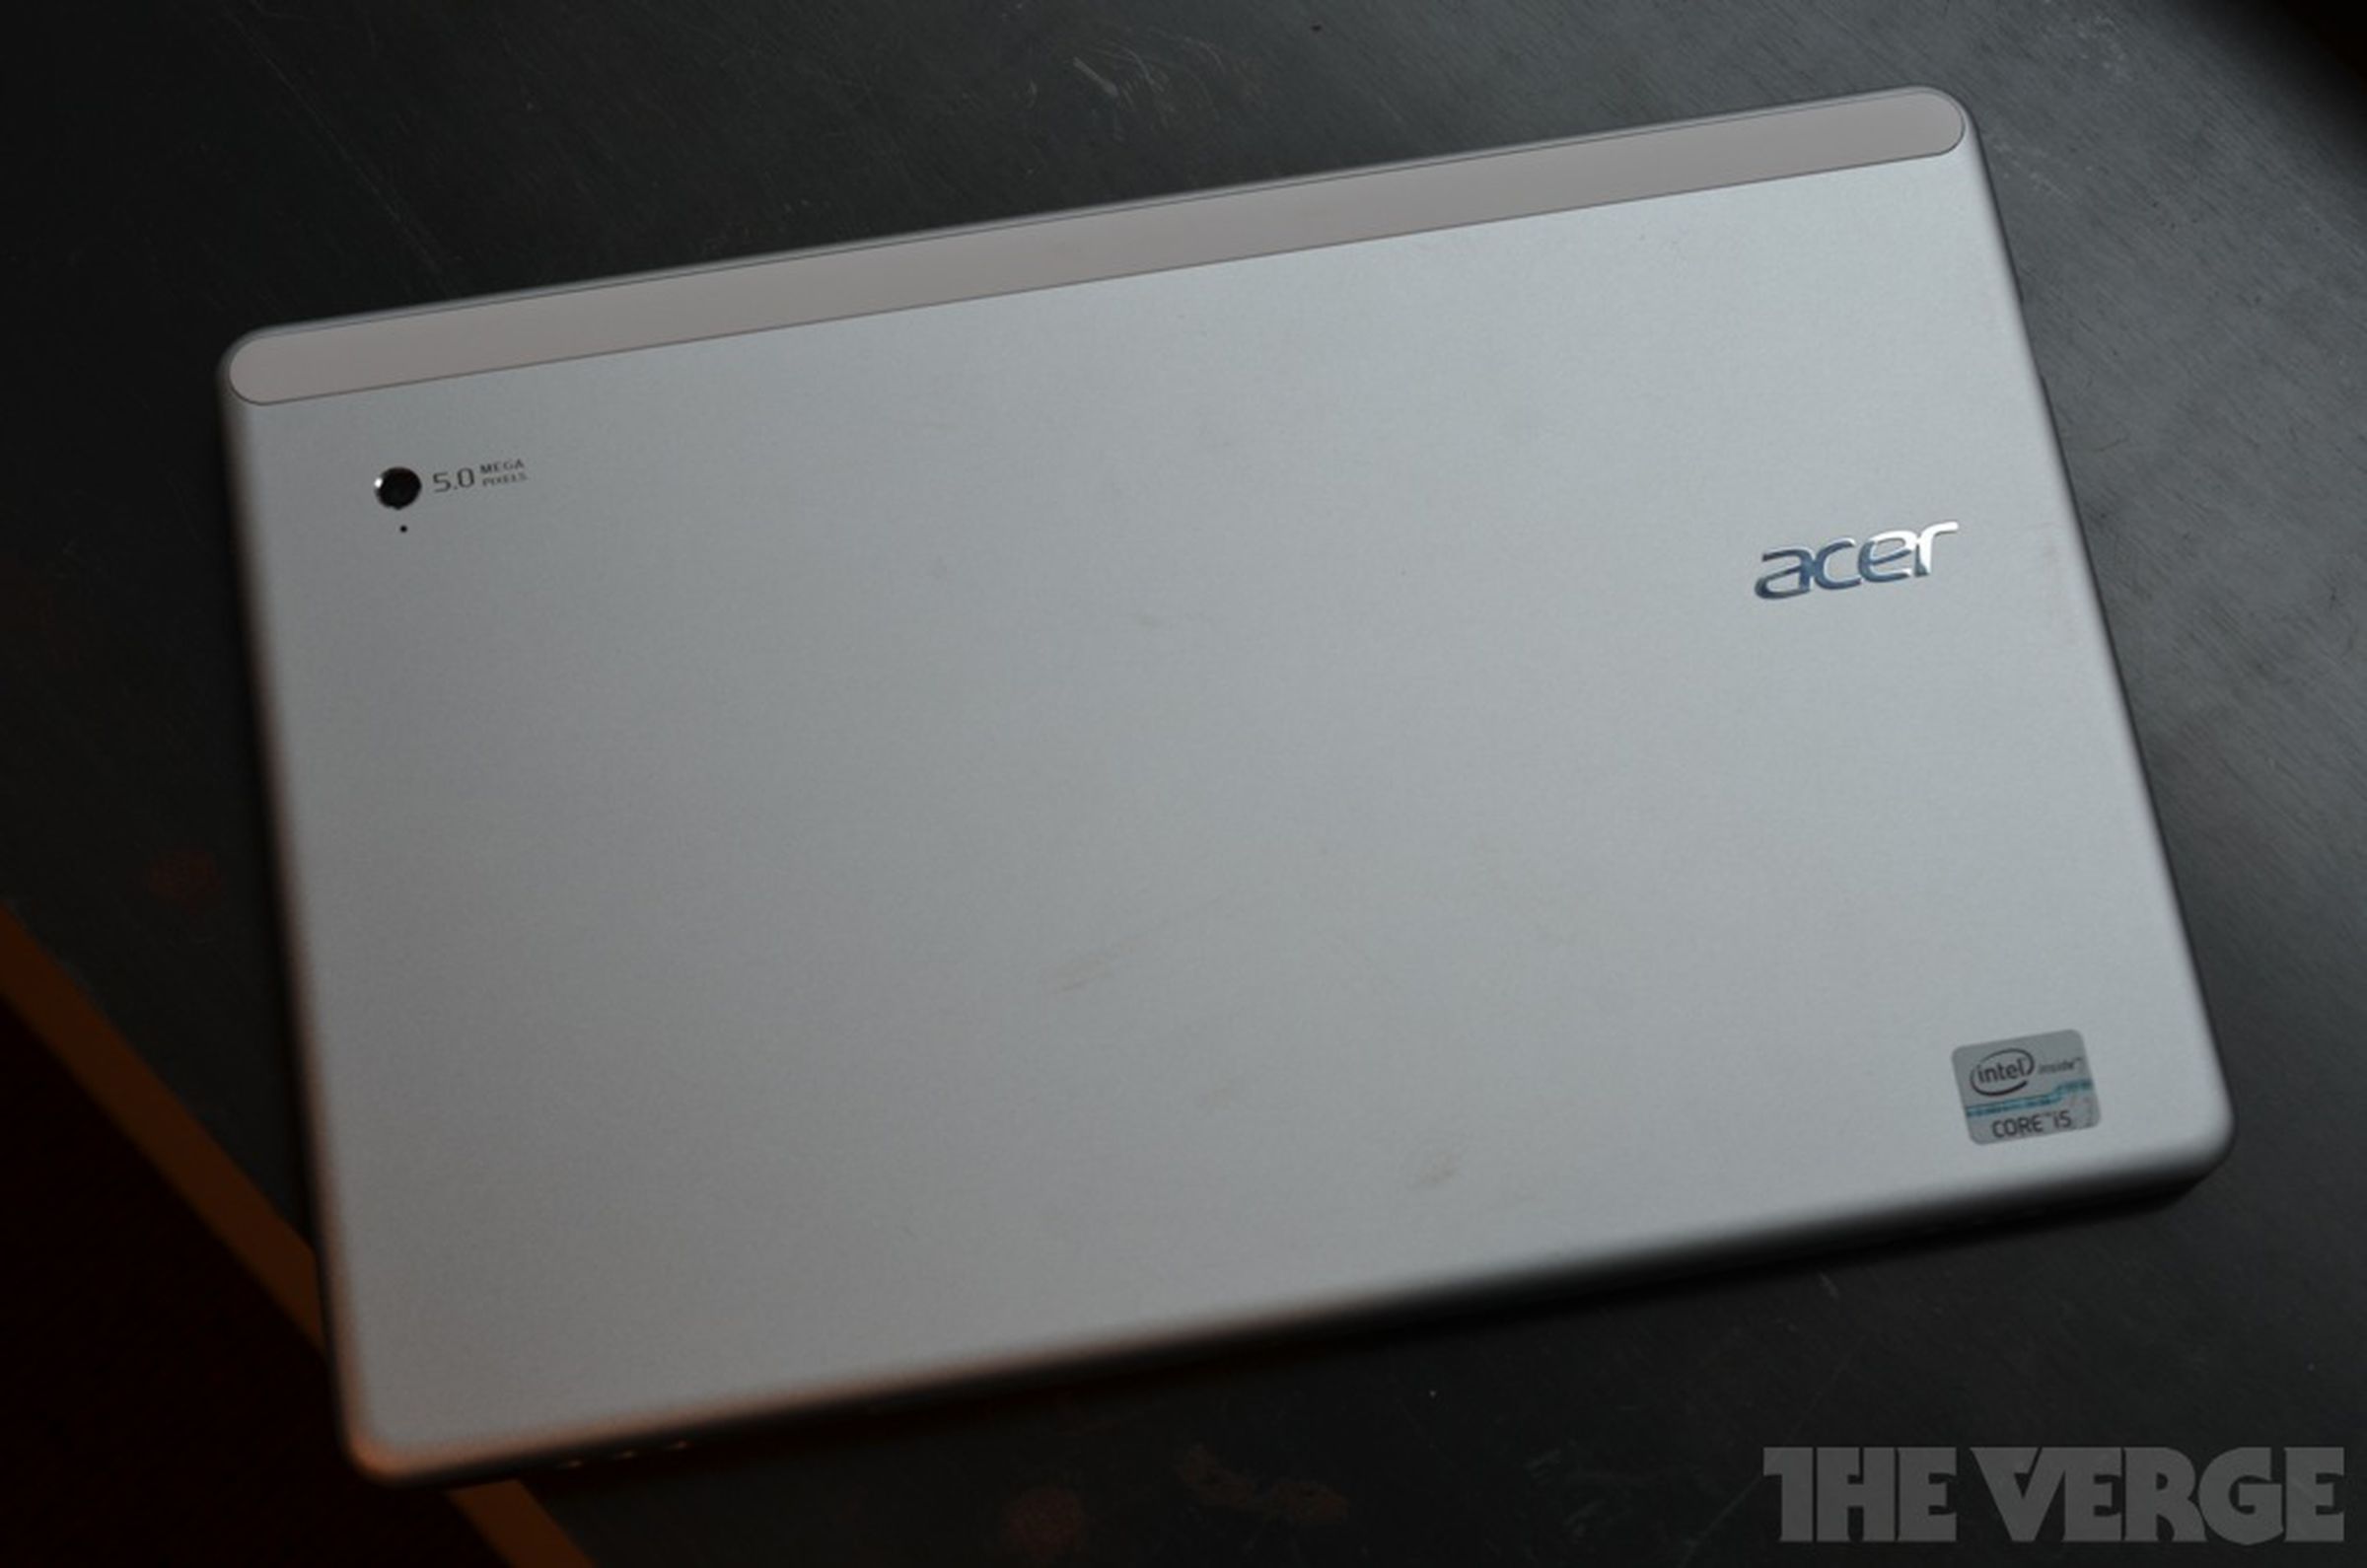 Acer Iconia W700 hands-on photos